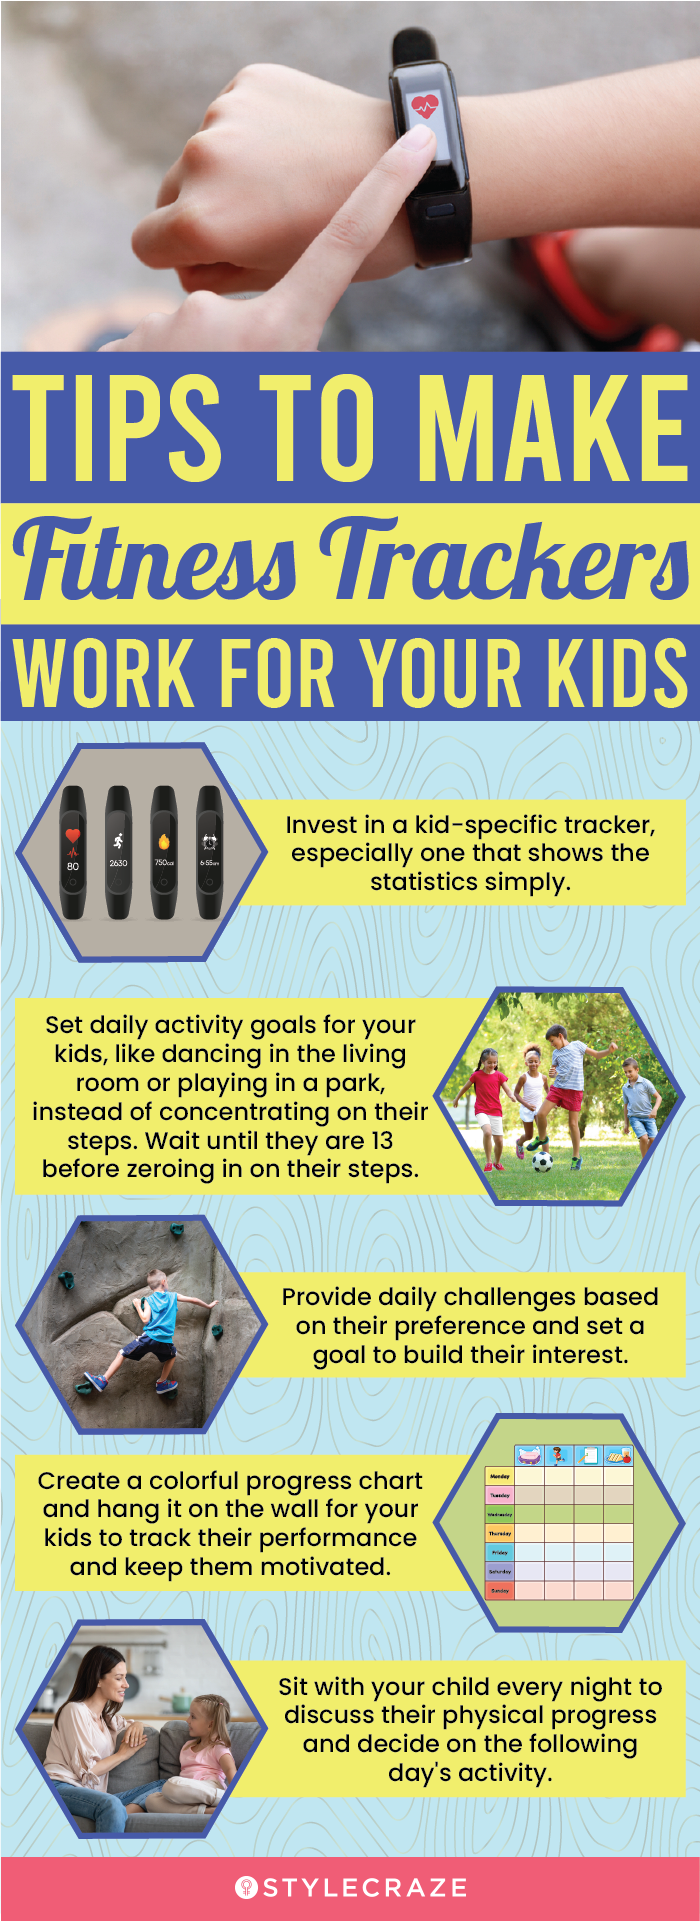 Tips To Make Fitness Trackers Work For Your Kids (infographic)